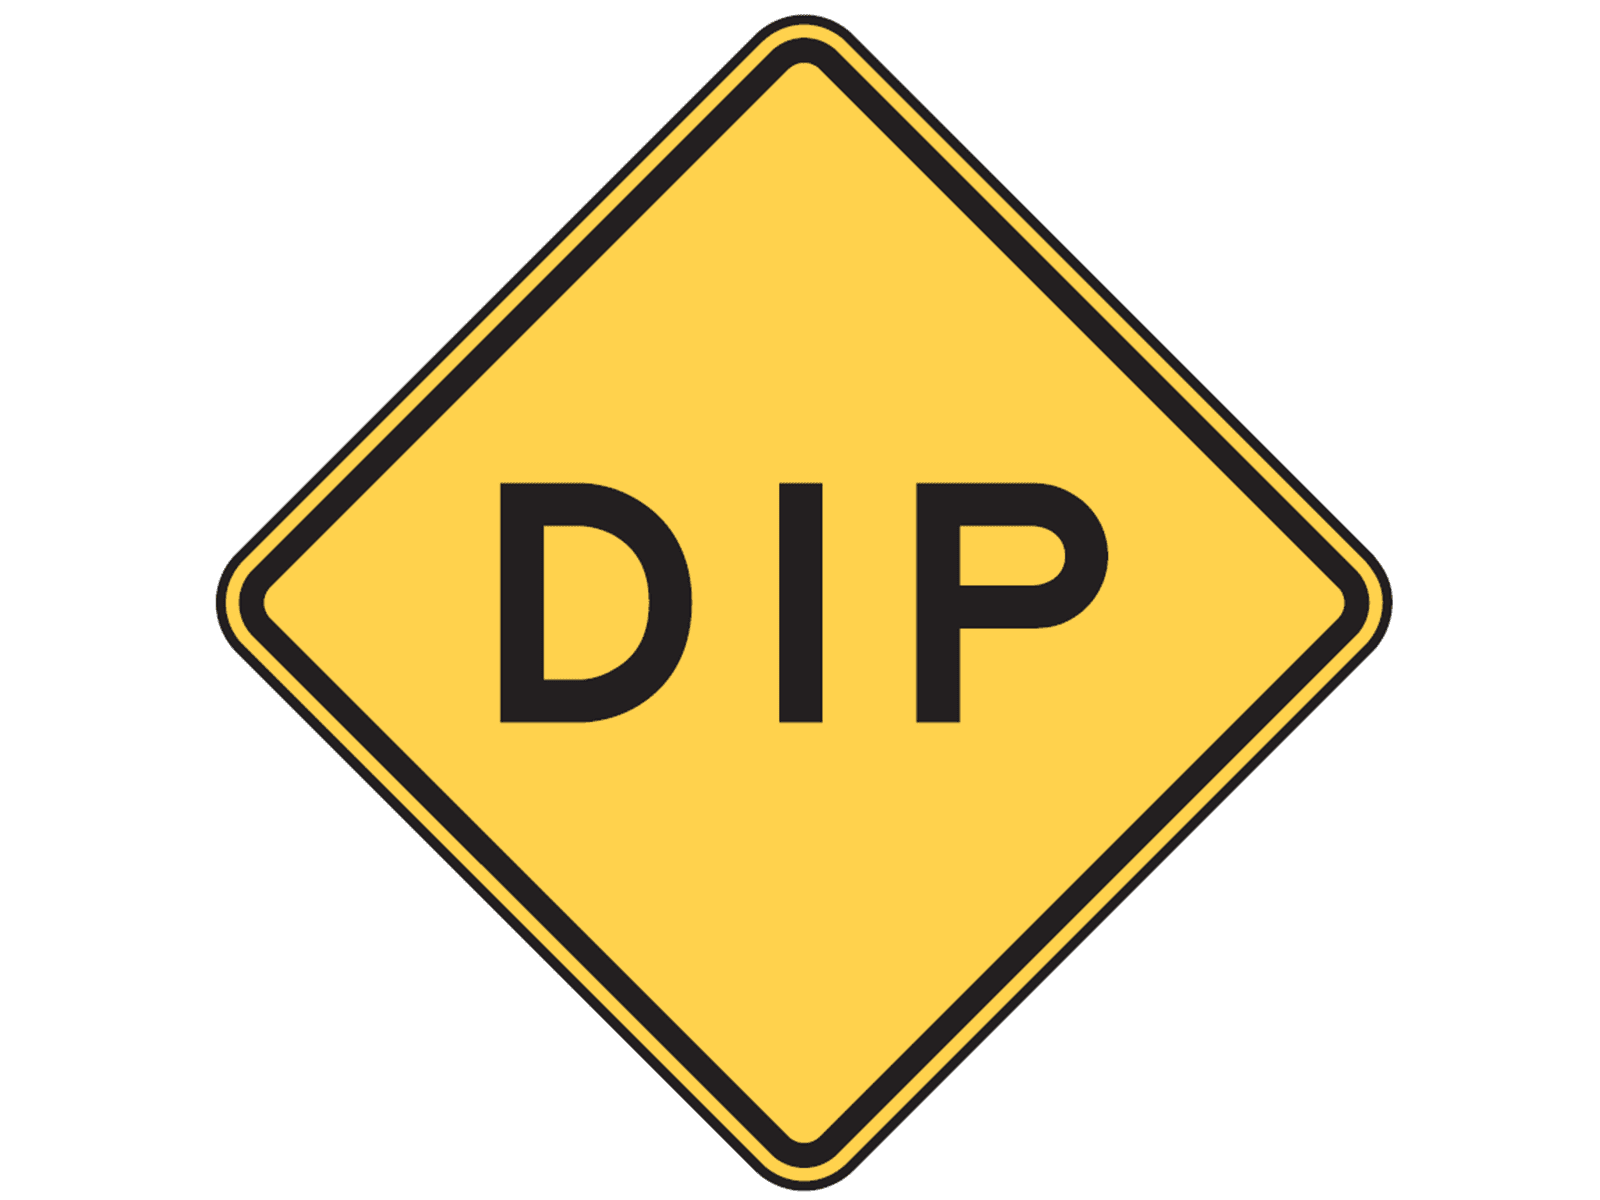 DIP W8-2 - W8: Pavement and Roadway Conditions